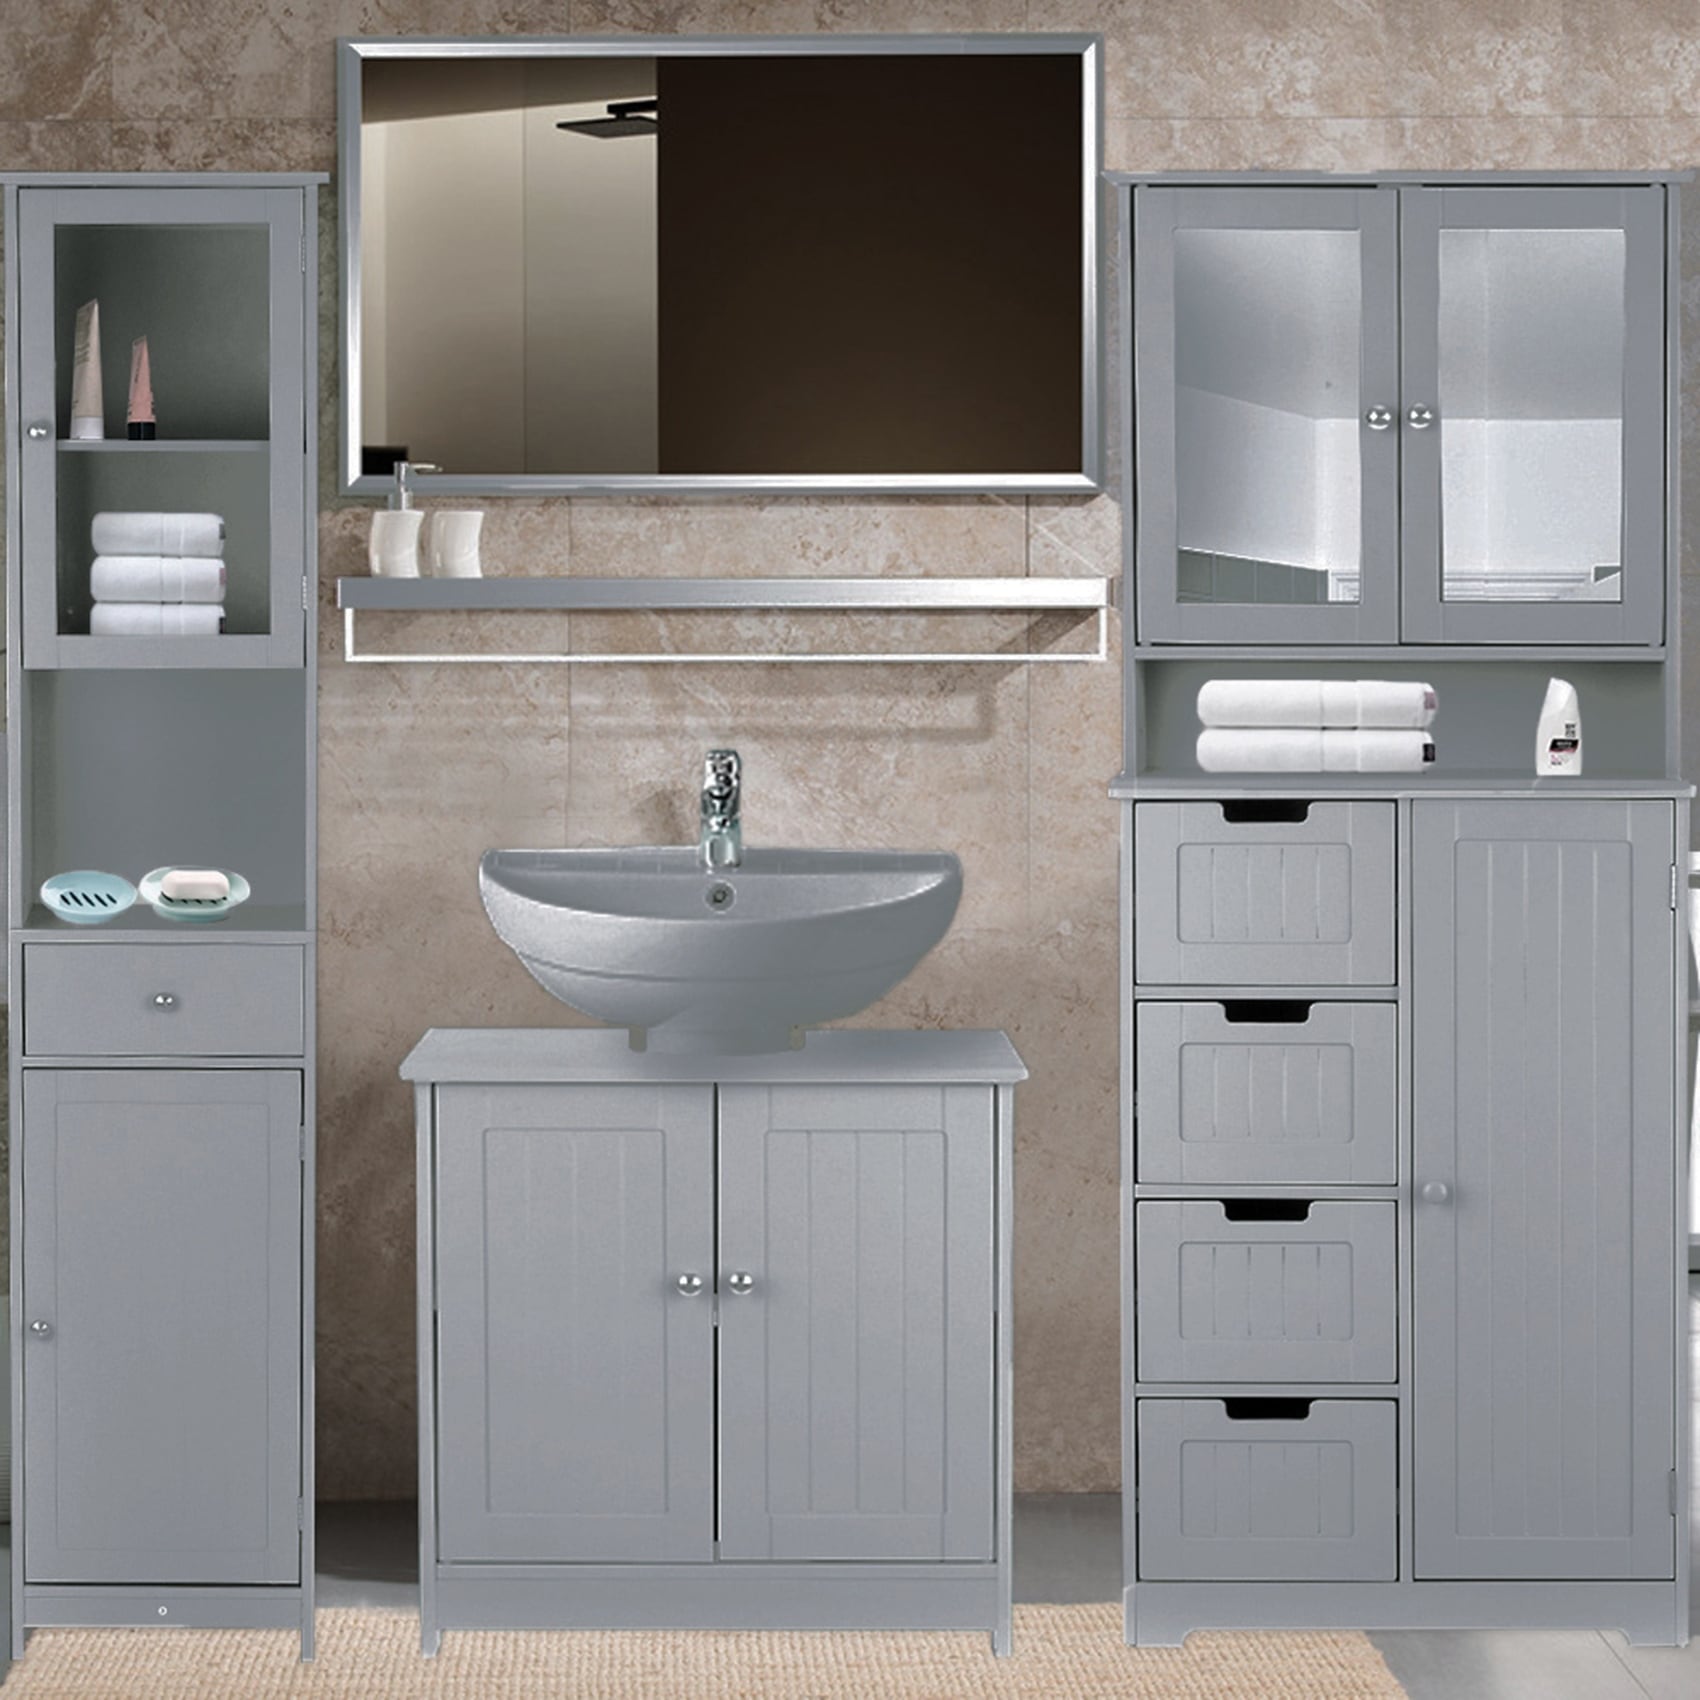 https://ak1.ostkcdn.com/images/products/is/images/direct/460459d18ef730dc985b352eb19e532ca5394a2c/European-Under-Sink-Storage-Cabinet-Locker-for-Bathroom%2C-2-Door-Closed-Vanity-with-2-Layer-Organizer-Waterproof-Cabinet%2C-Grey.jpg